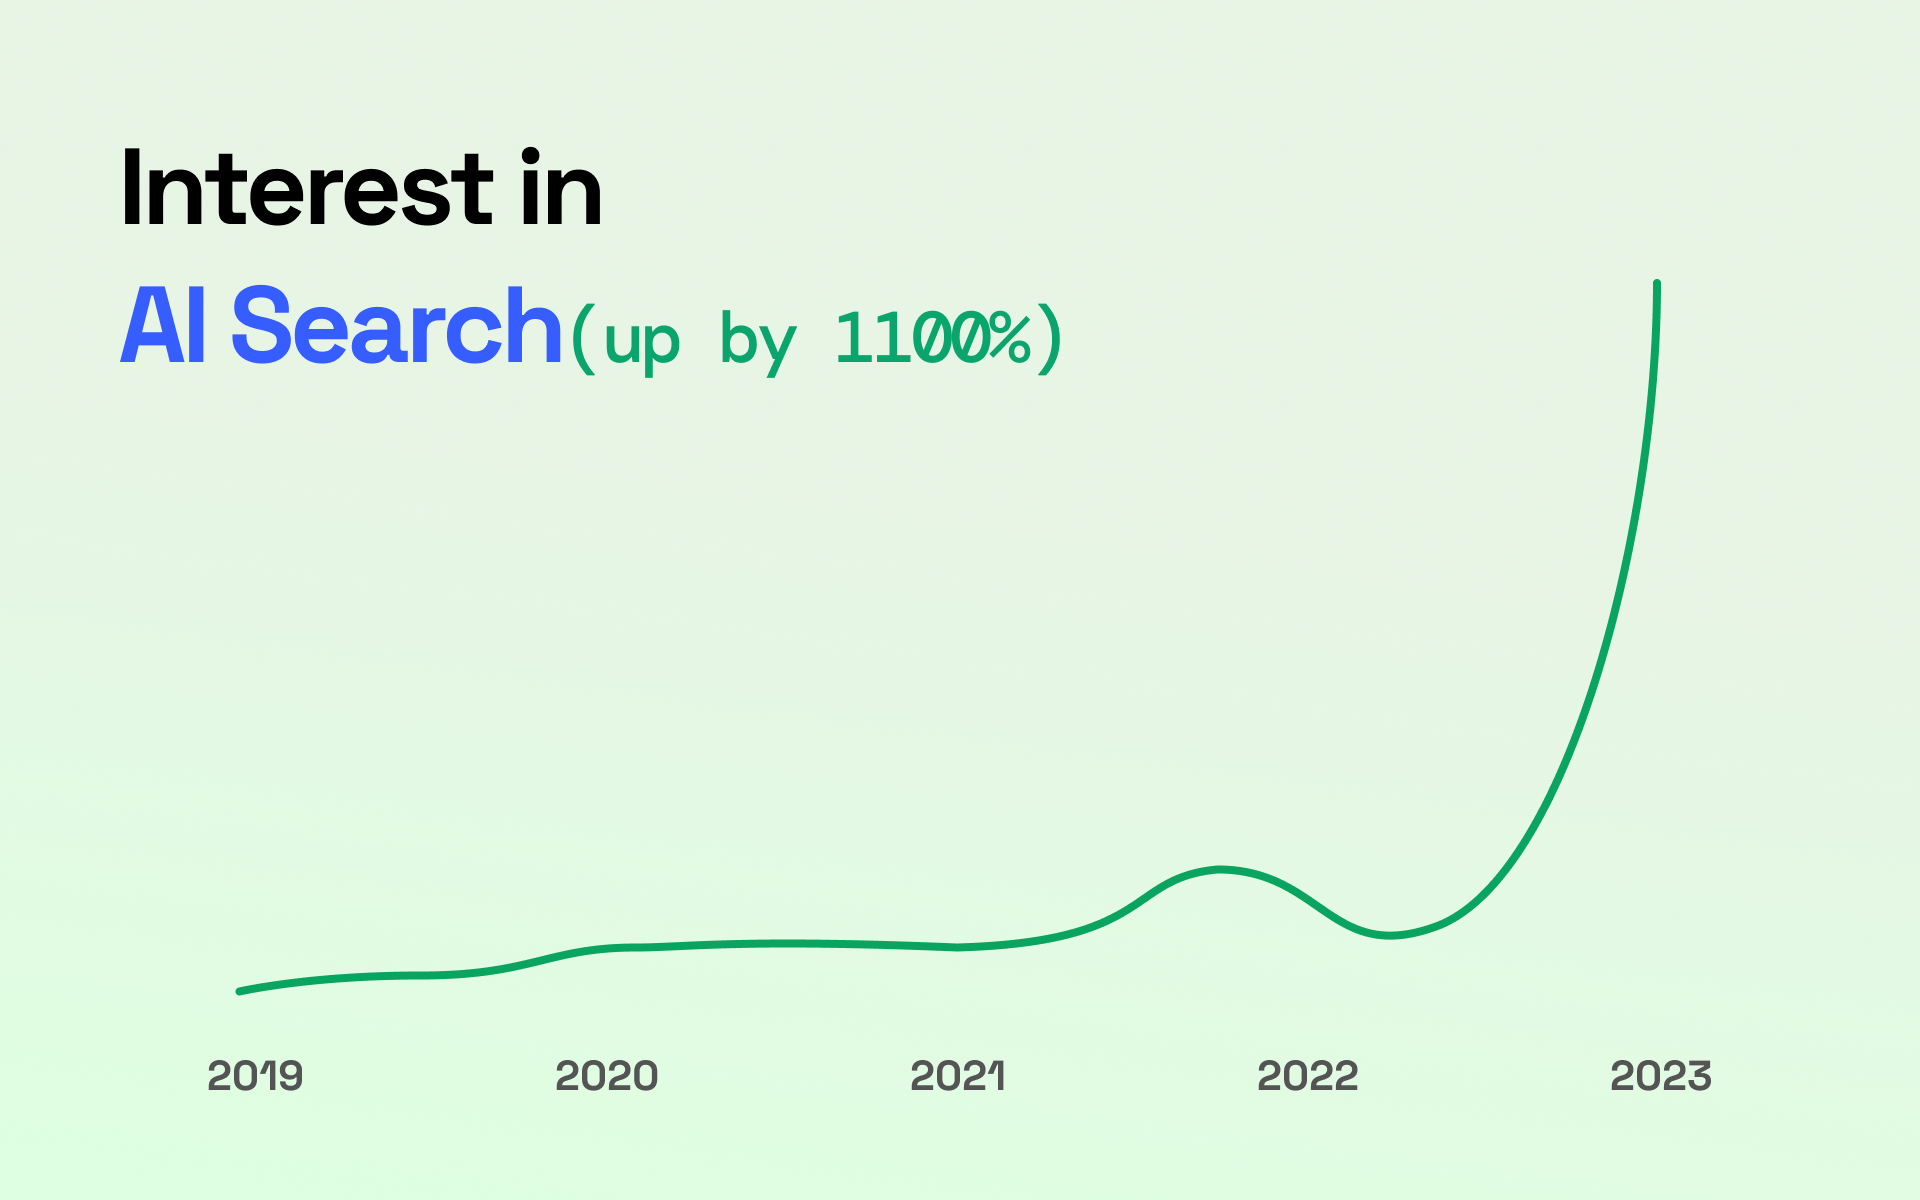 Interest in AI search is up by 1100%